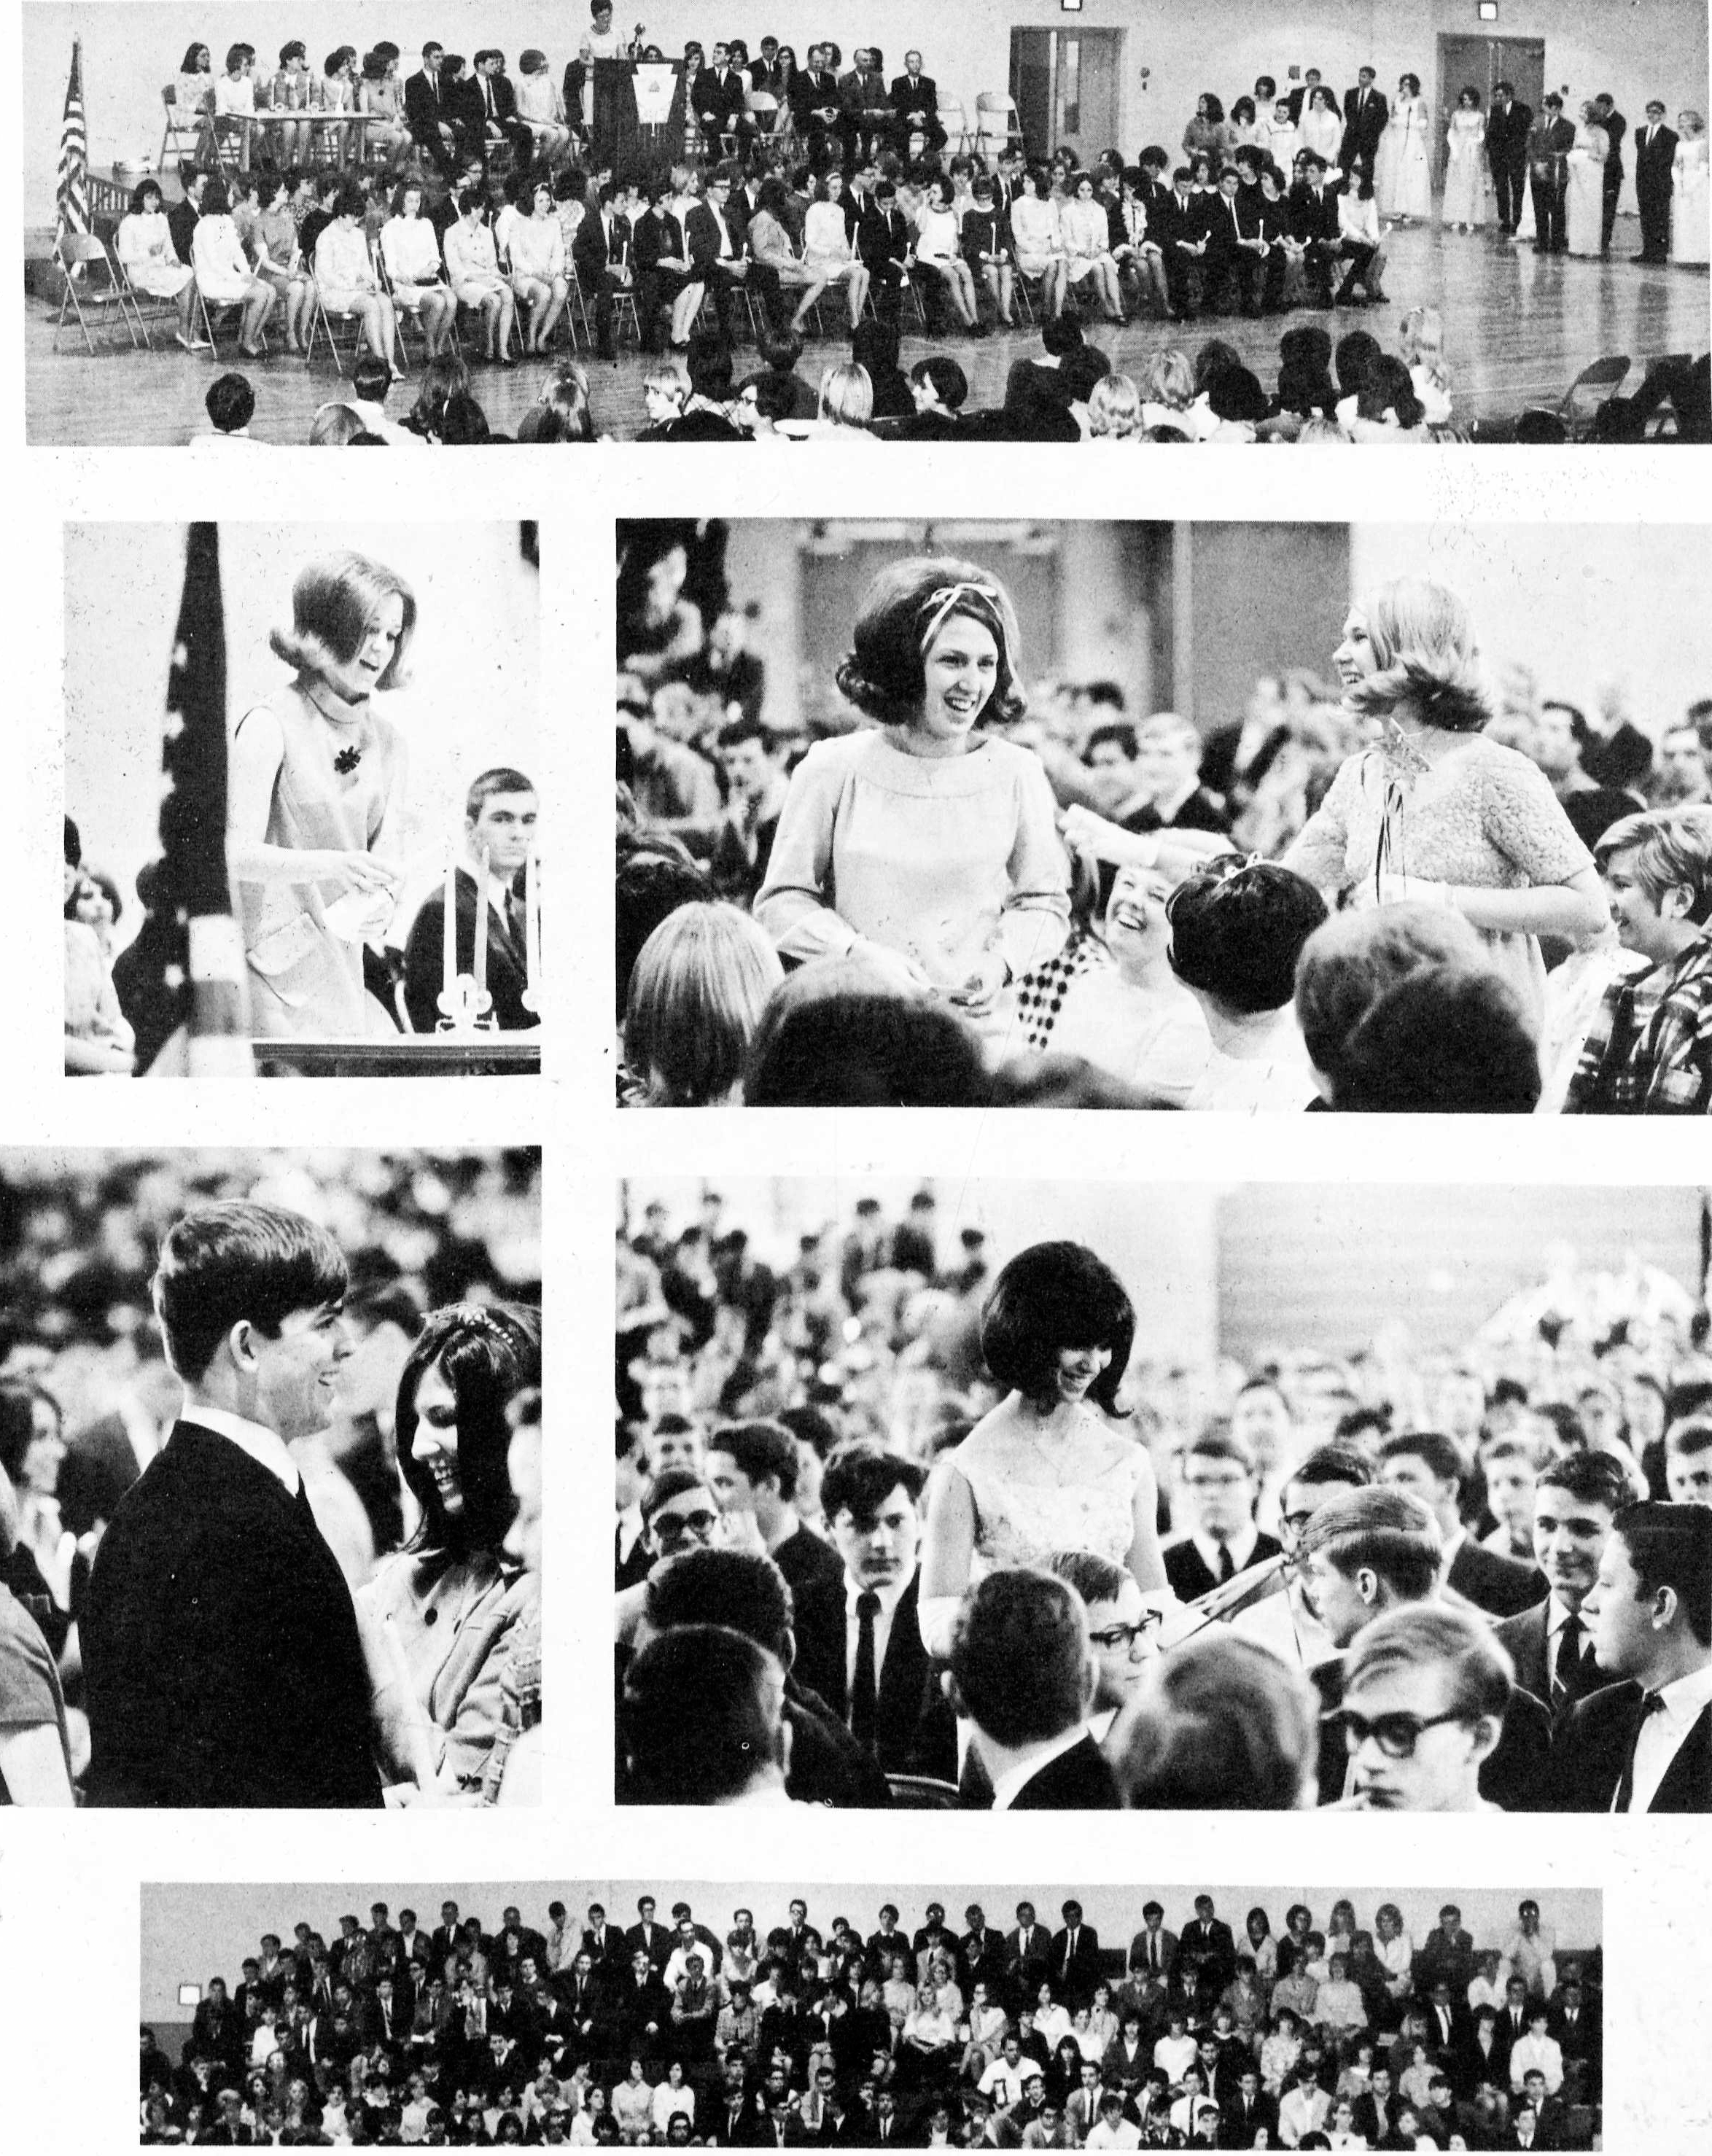 RGHS National Honor Society Tapping Ceremony: PROM MAGAZINE APRIL 1968